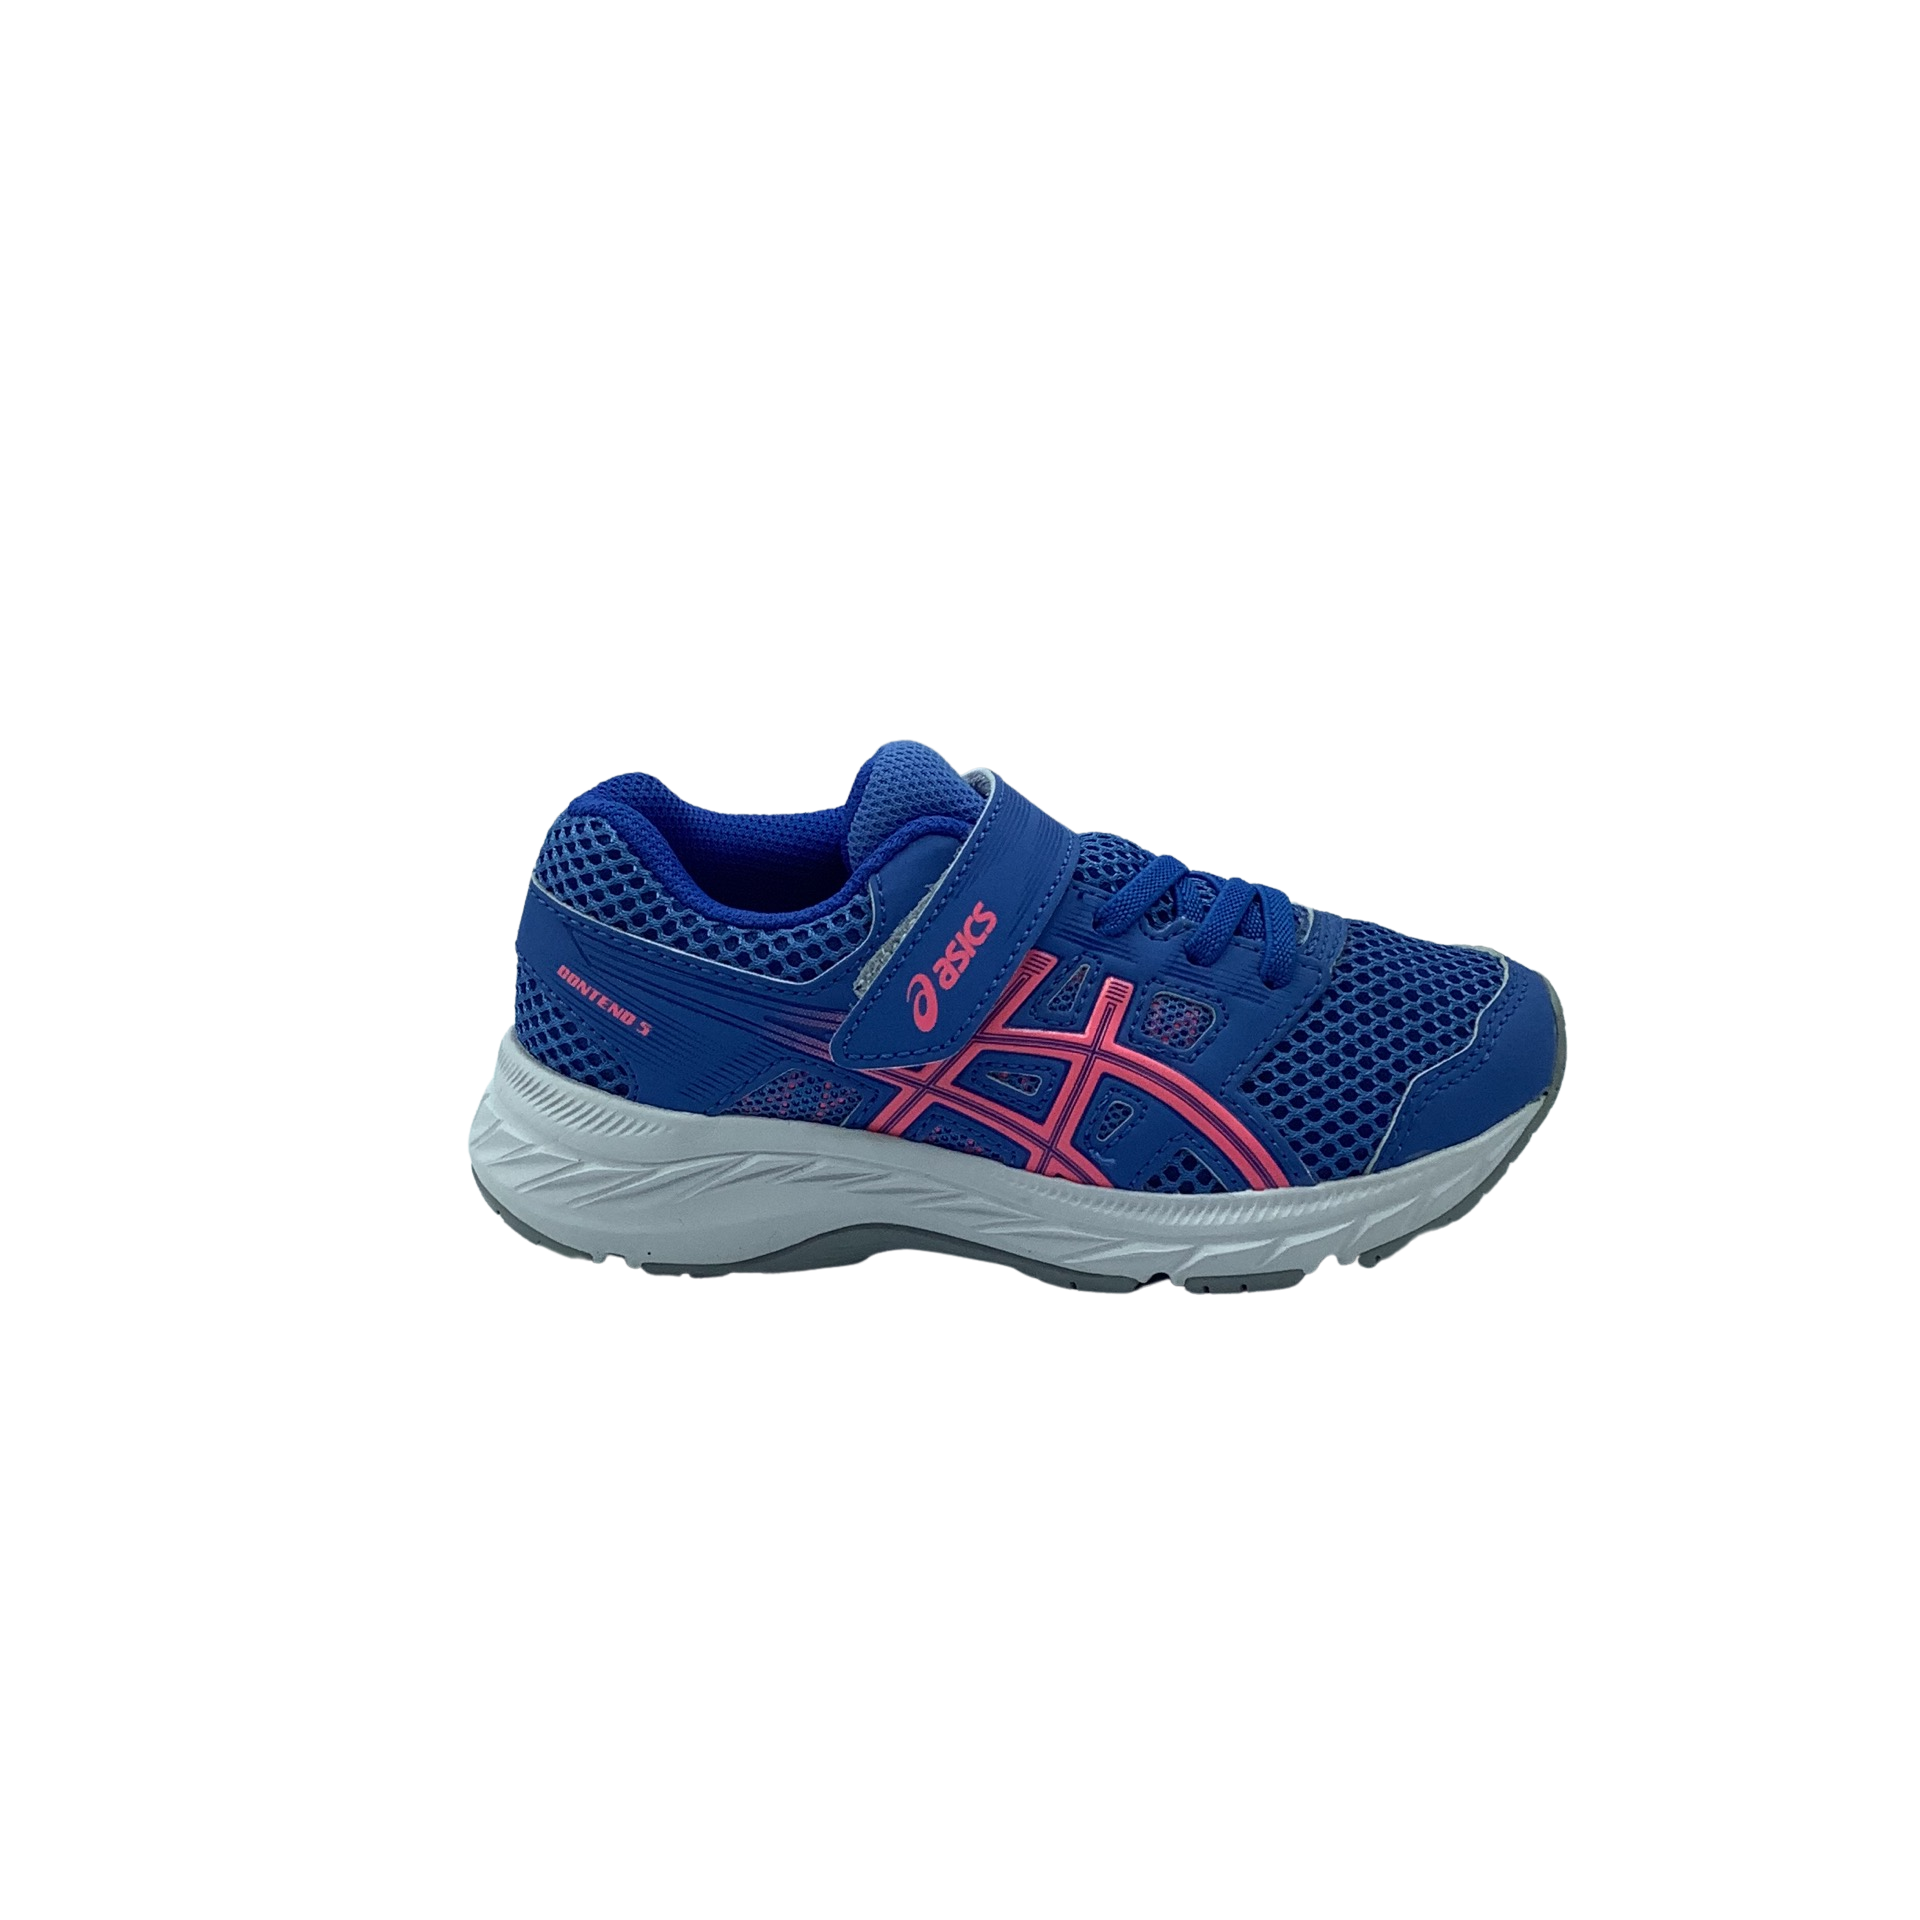 Asics CONTEND PS – Sports Uptown